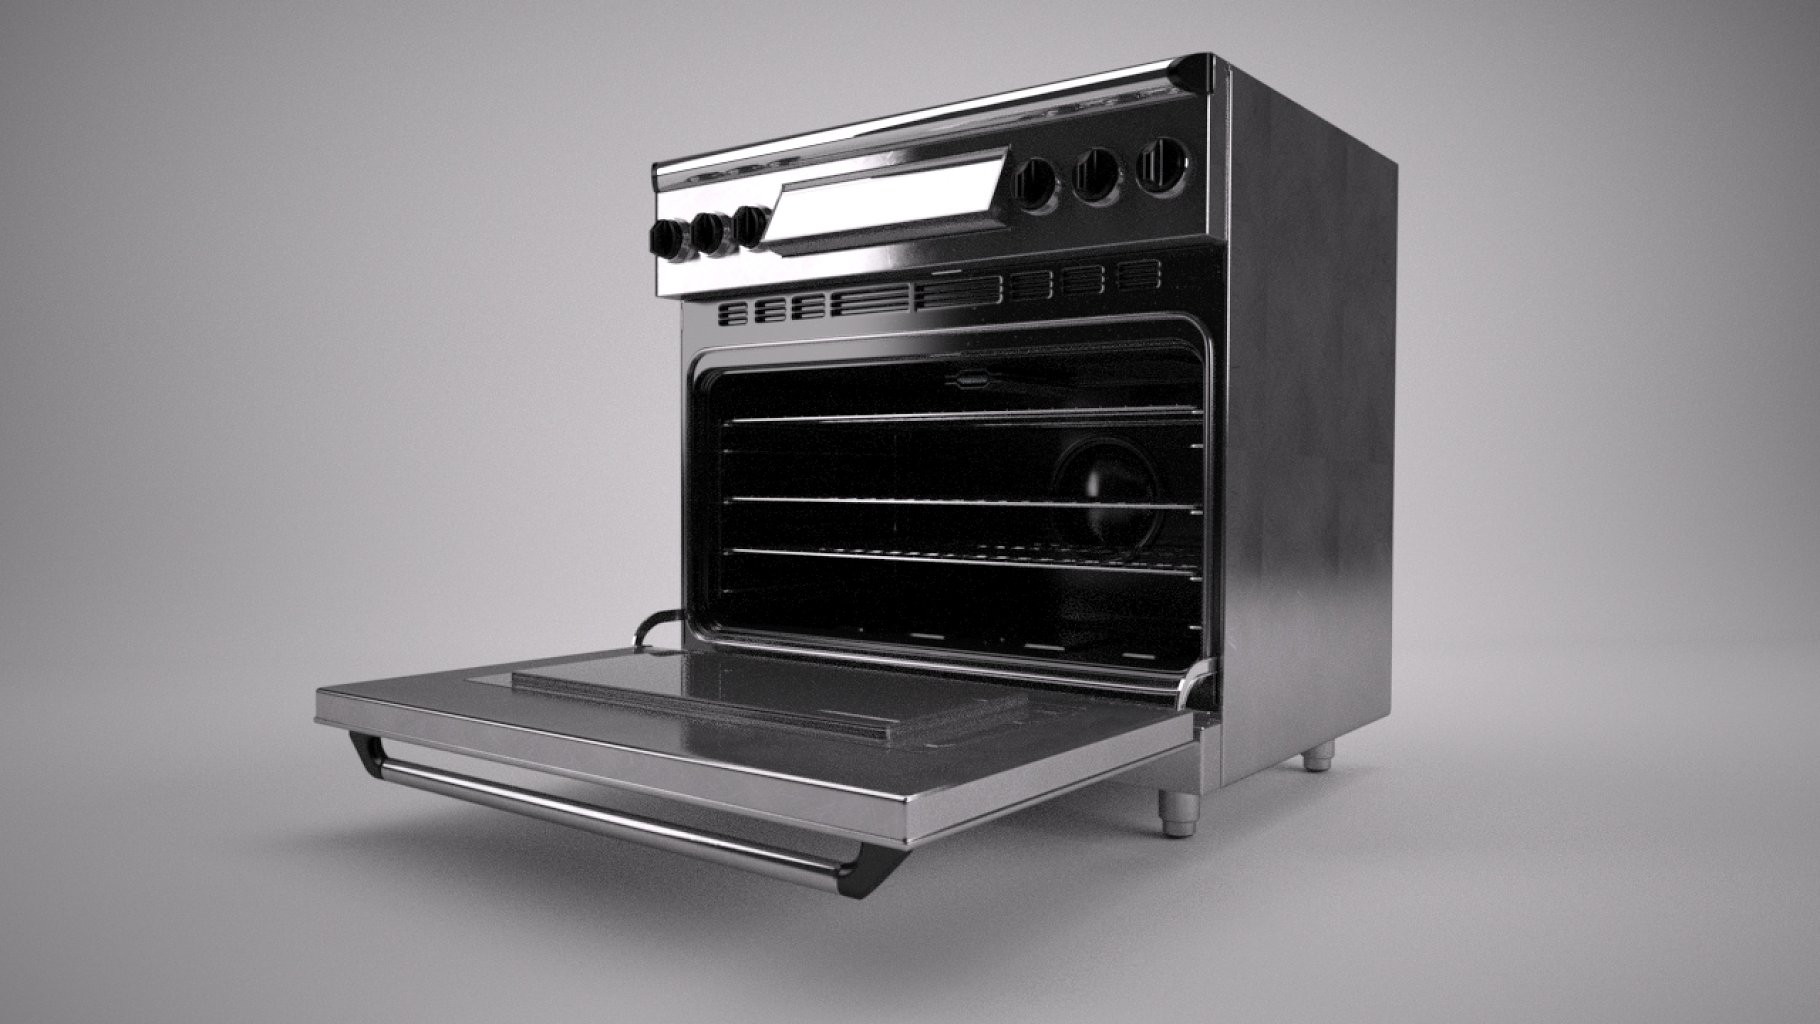 Image of a stove model.